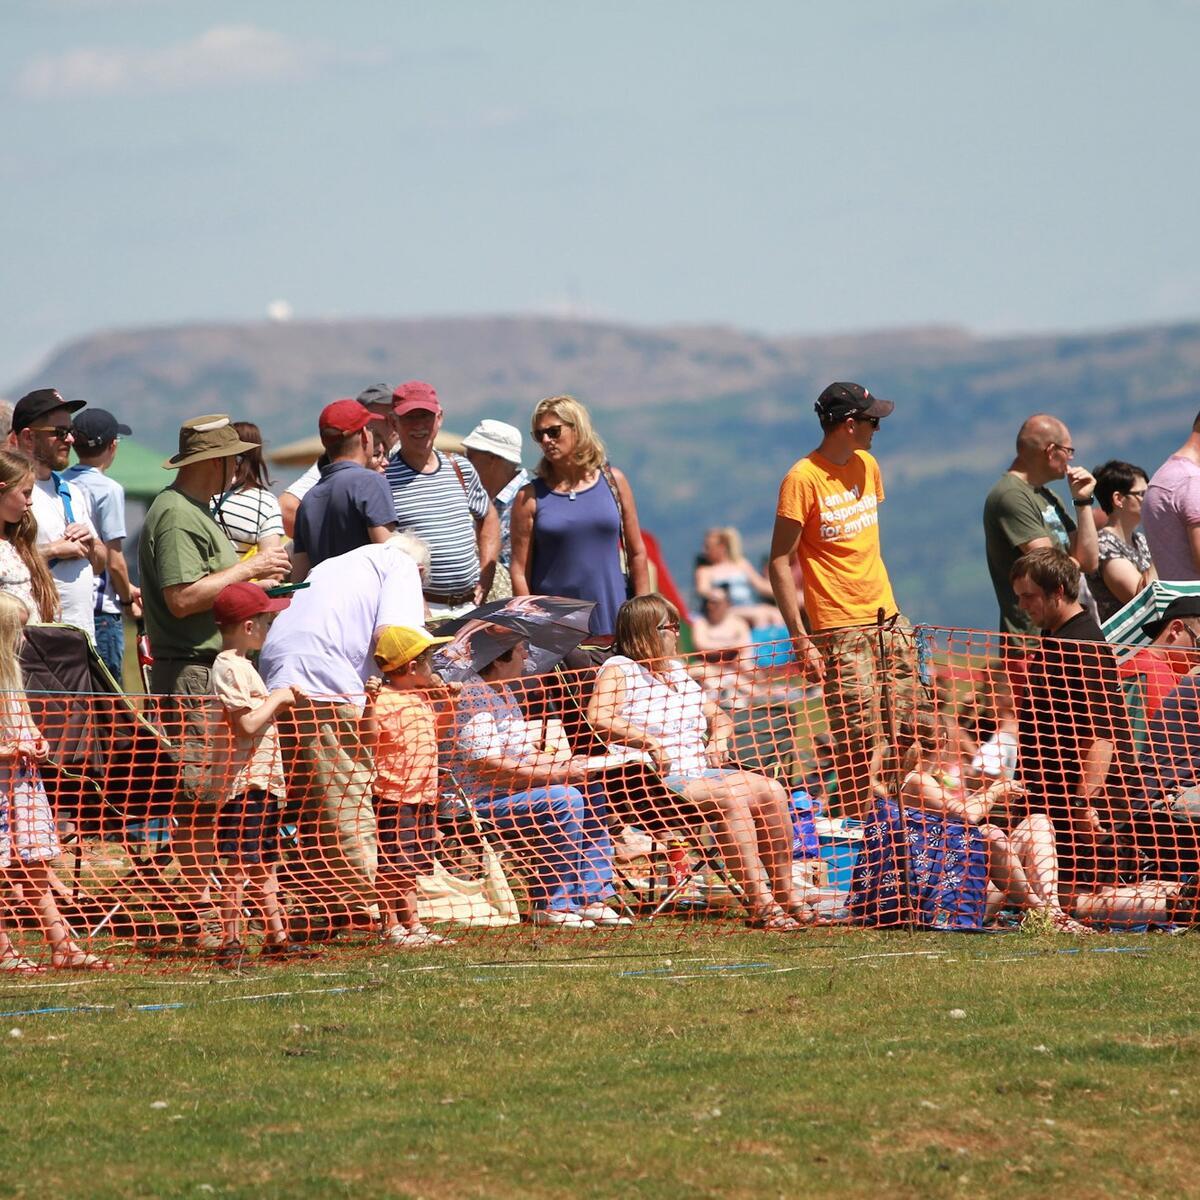 Spectators enjoying the day and the view